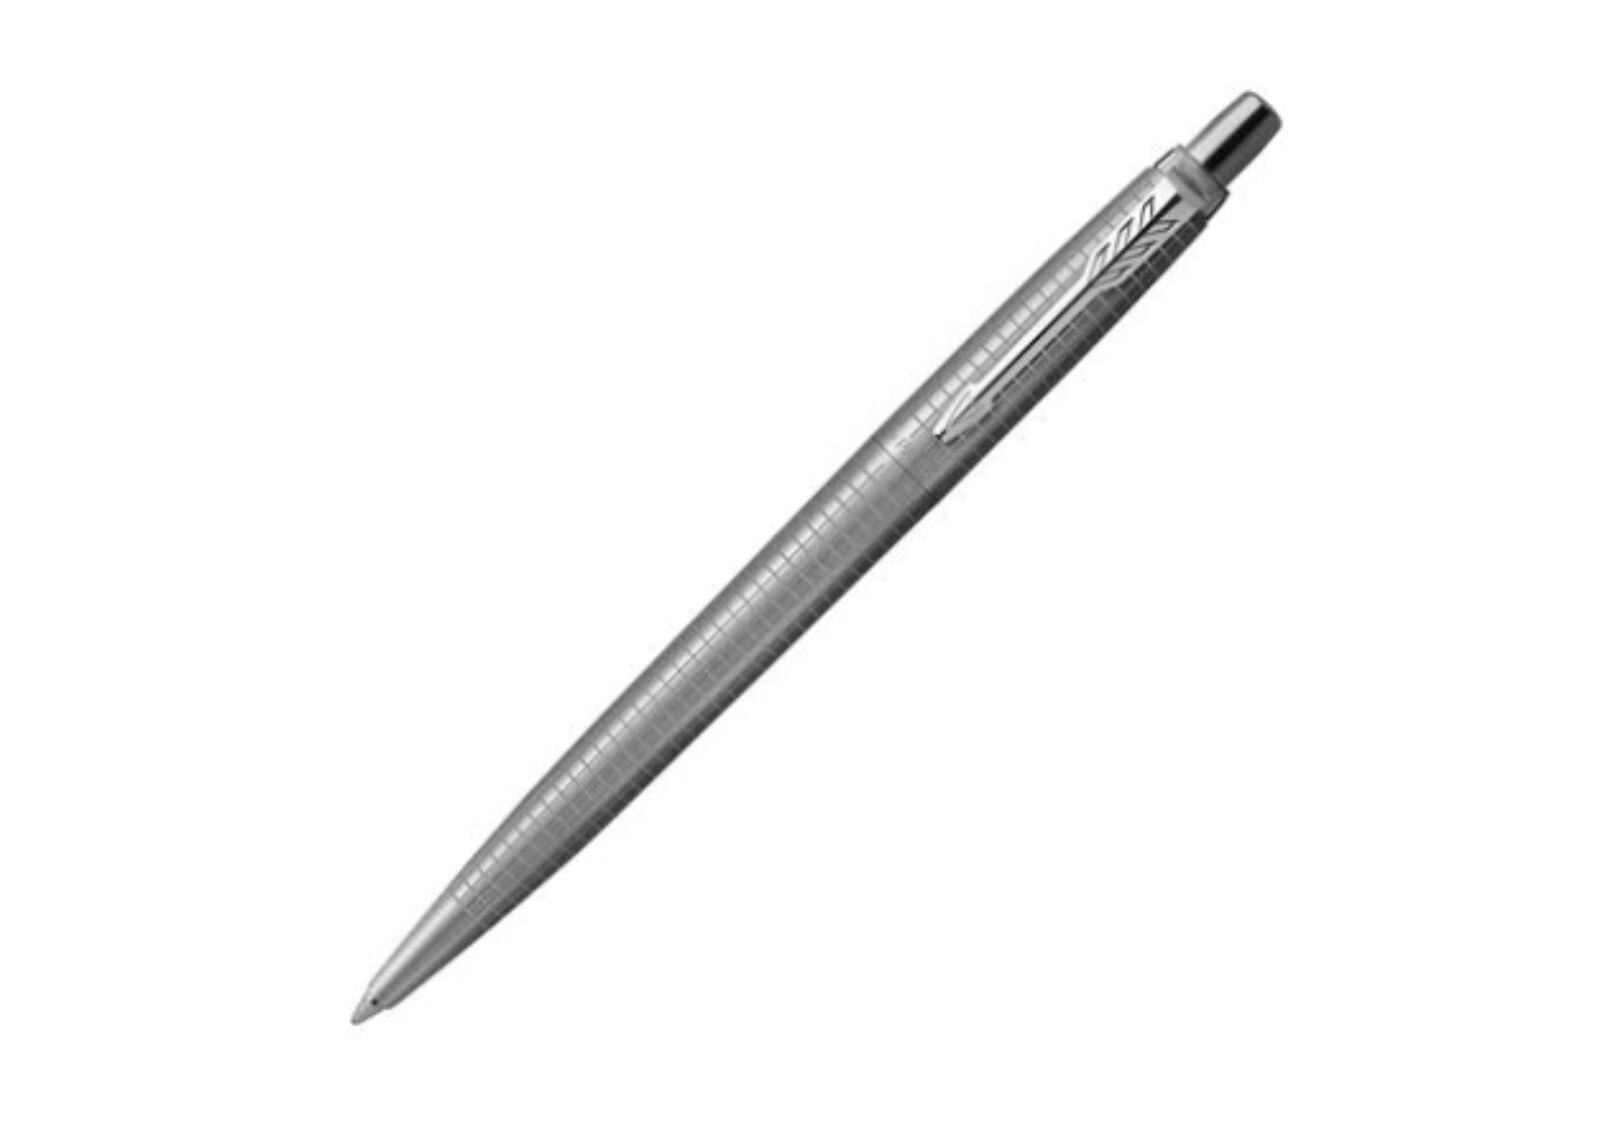 Parker Jotter 70th Anniversary Ballpoint Pen in Stainless Steel with Chrome Trim